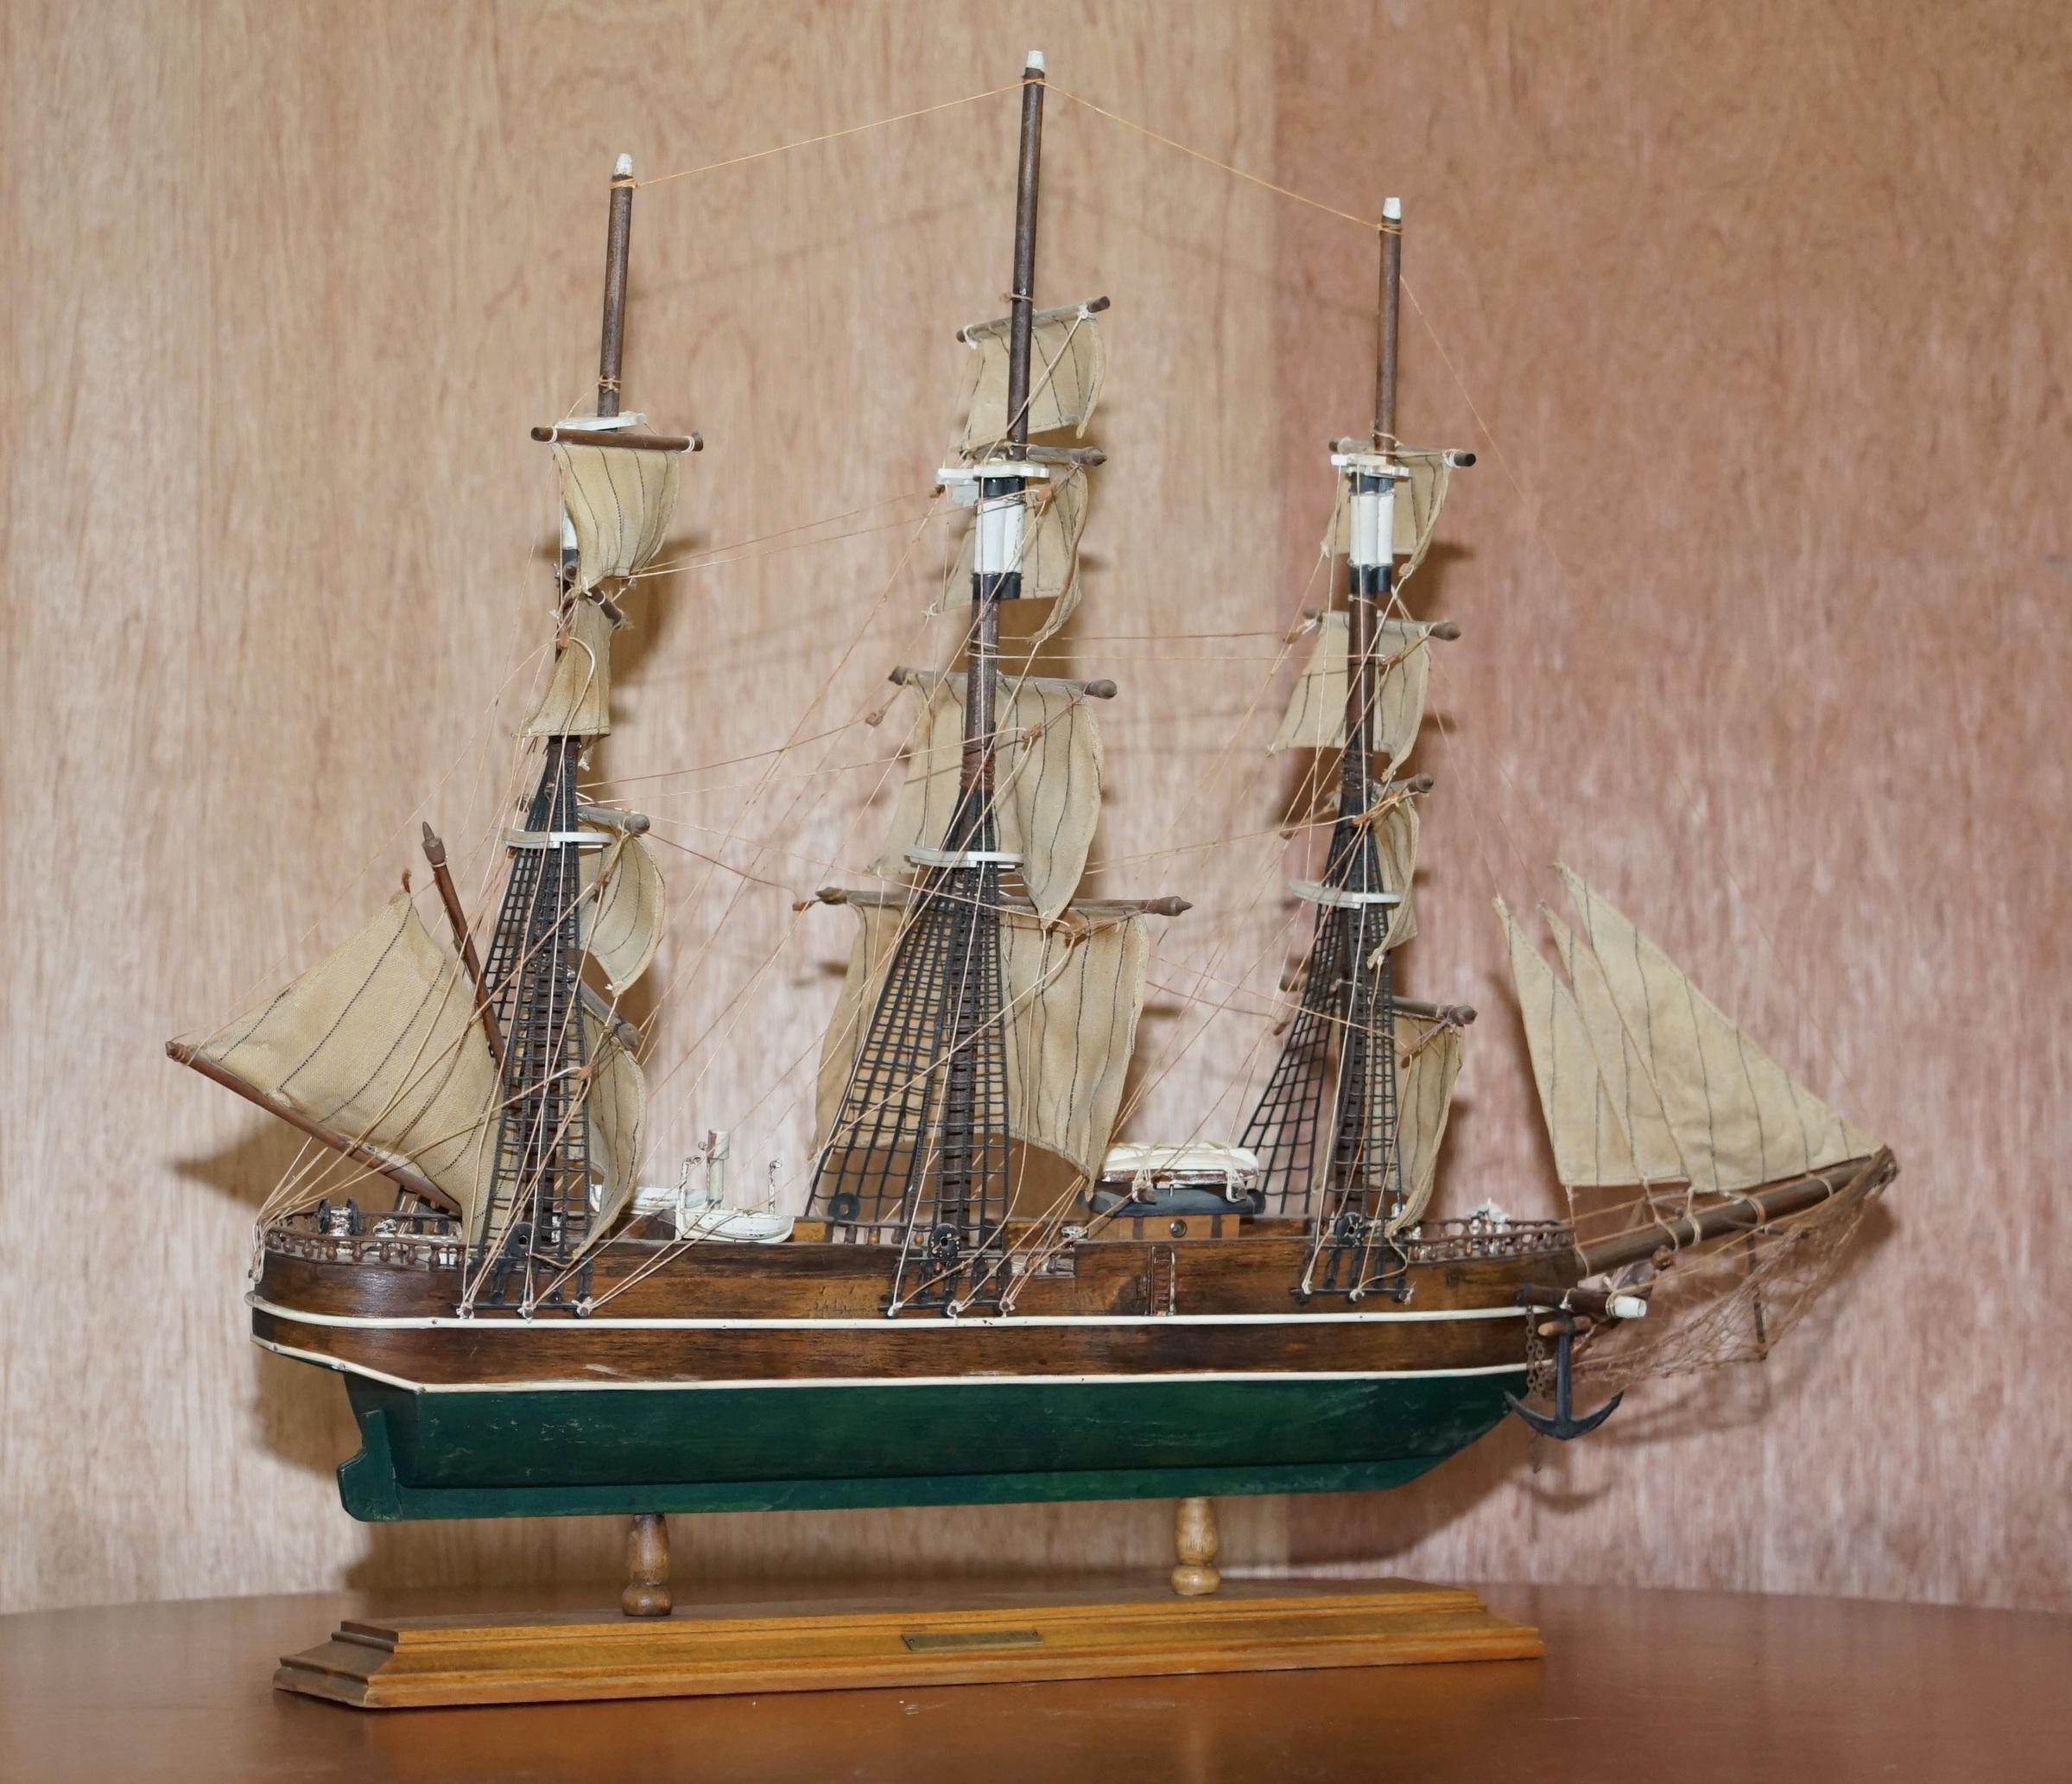 We are delighted to offer for sale this model of the Young America Clipper Ship, 1853.

A good looking highly detailed and well made model of the Young America, its fixed leaning to one side, I'm not sure if that's intended to show the movement of